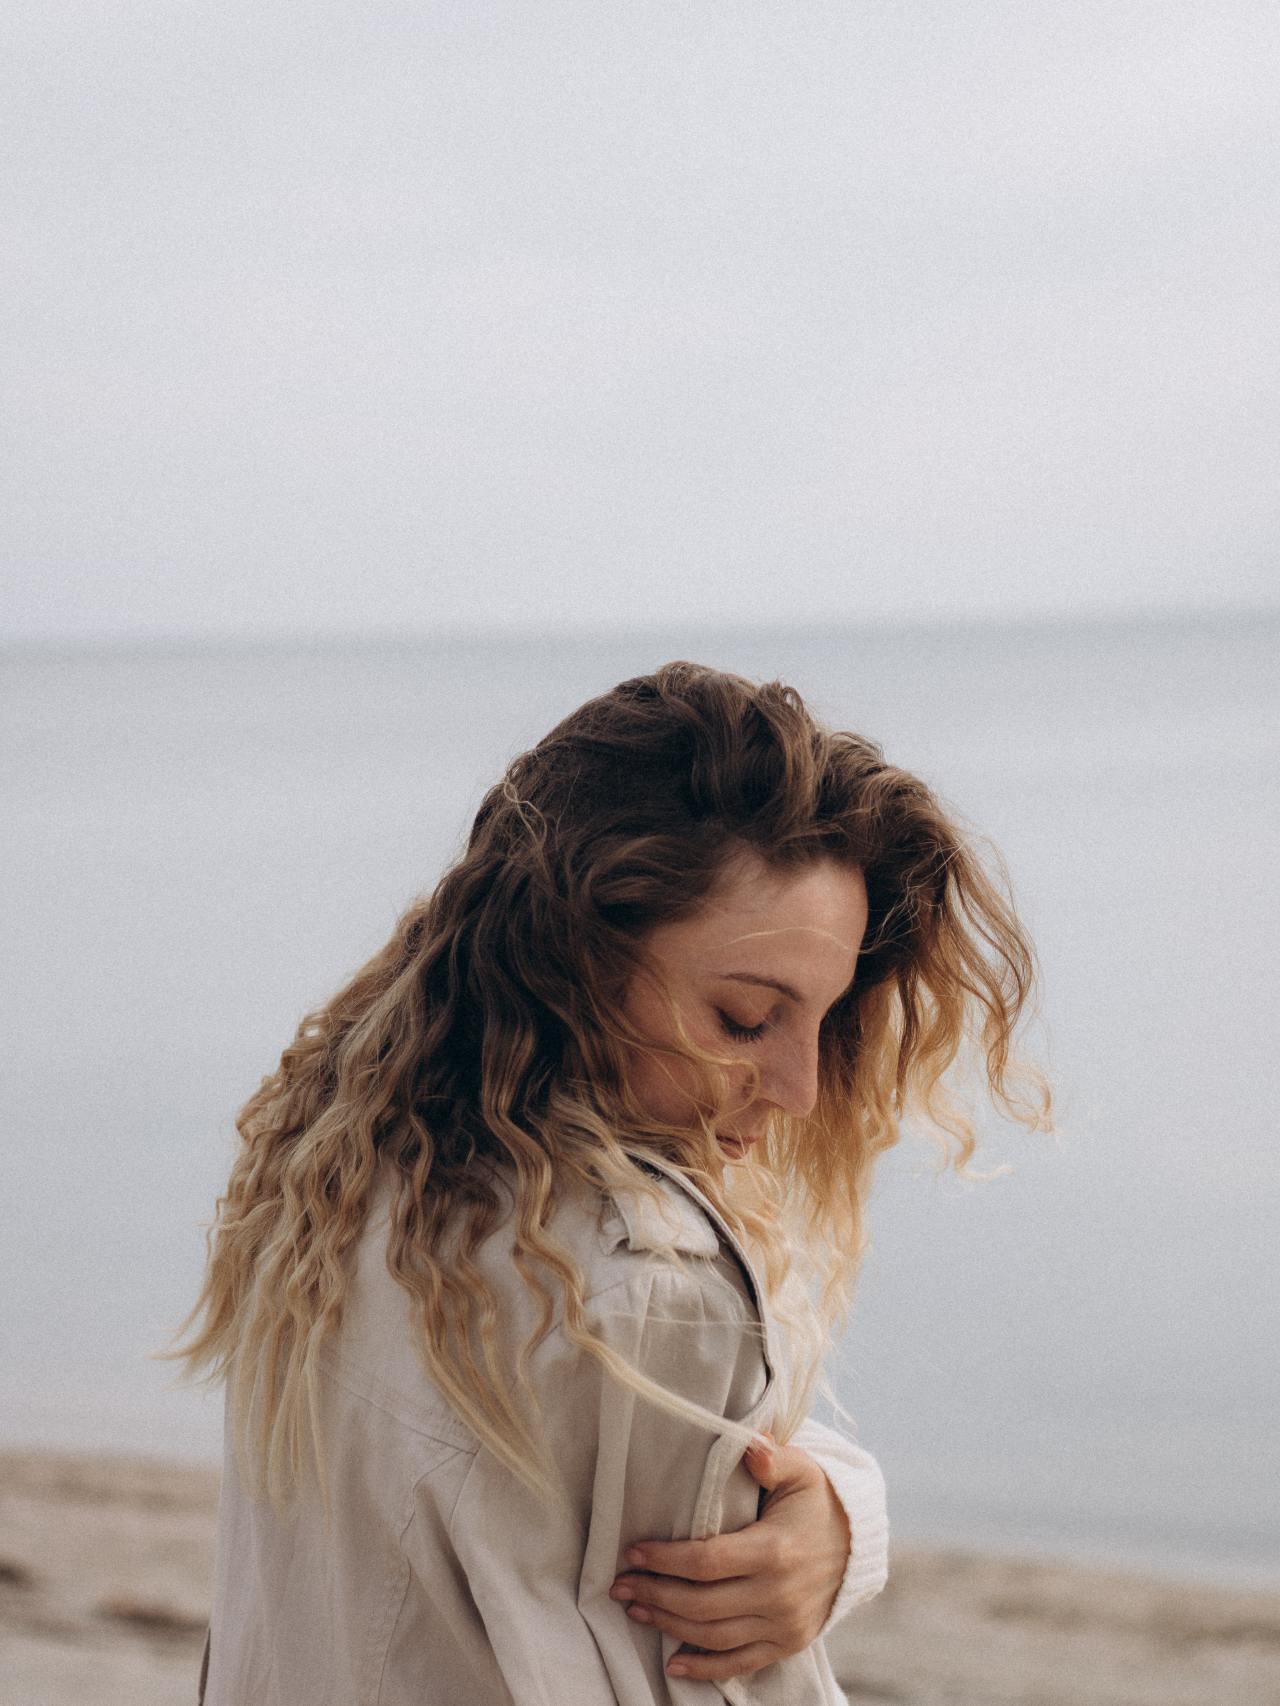 Why You Secretly Hate Yourself (In One Sentence) Based On Your Zodiac